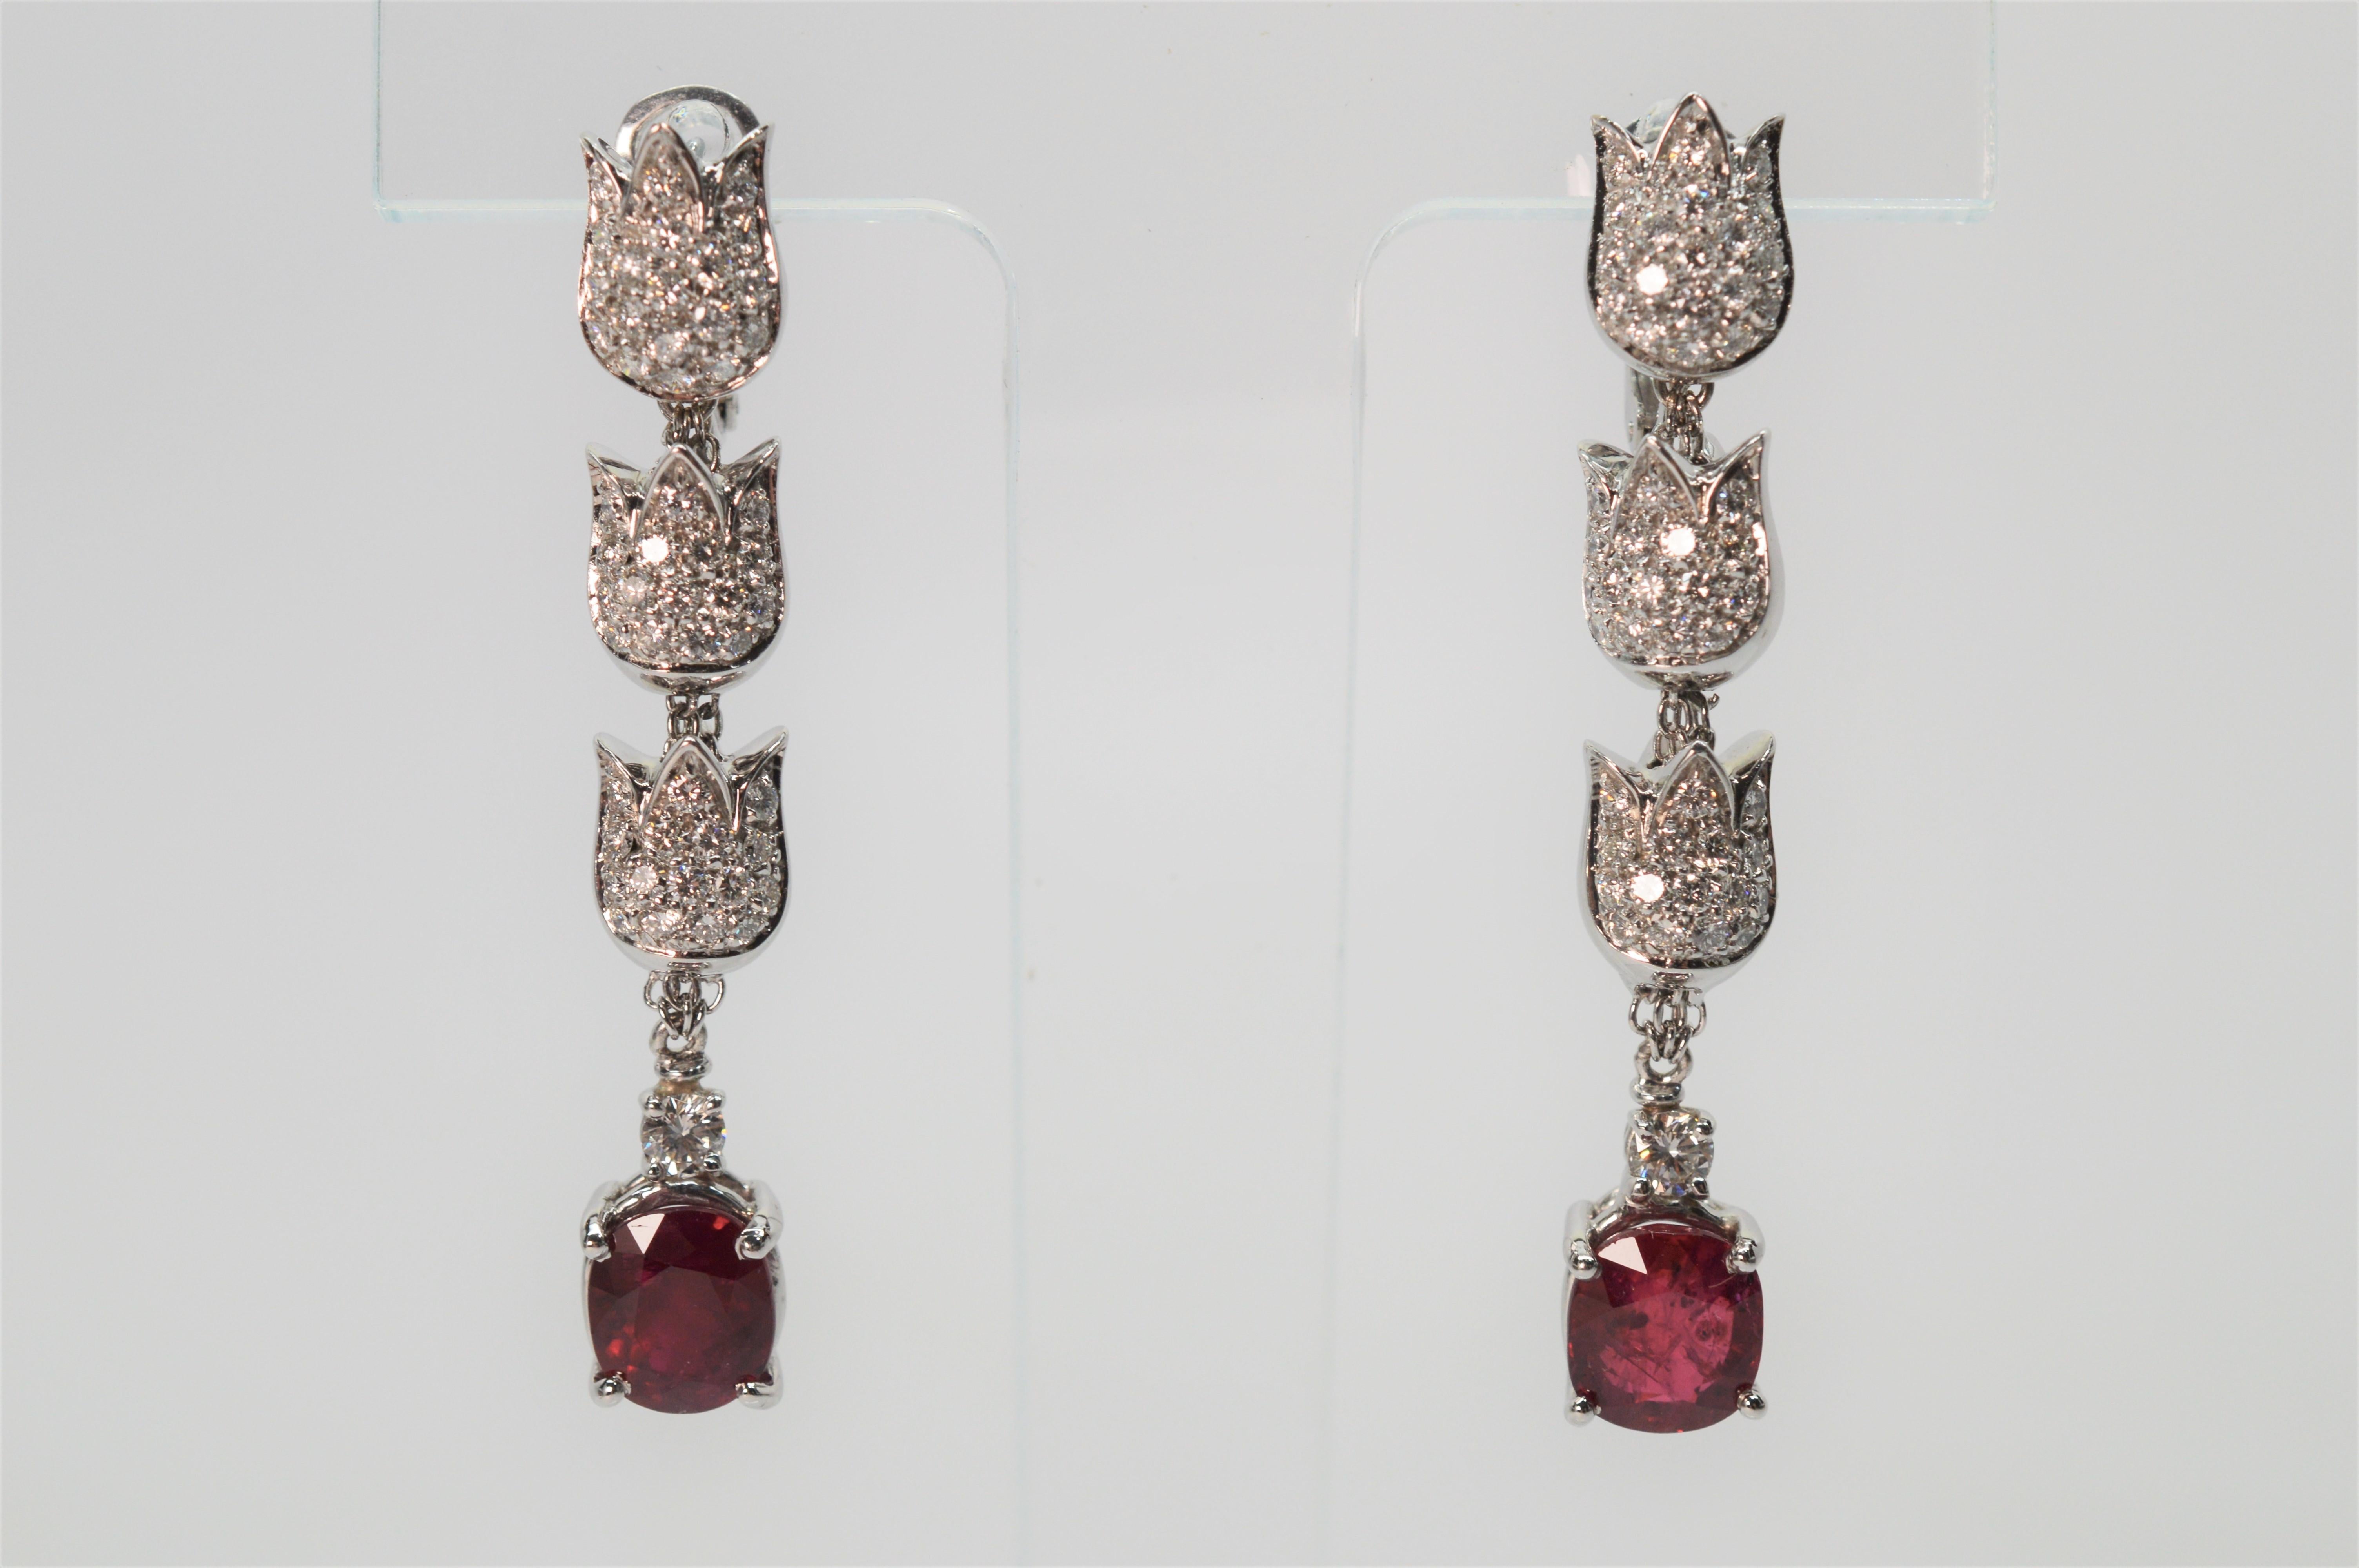 Dramatic diamond covered floral inspired triple drops in eighteen karat 18K white gold leads to vibrant rich red prong-set rubies on this elegant and unique earring pair by Mikawa.
White gold tulip shaped links sparkle with over 2.75 carats total